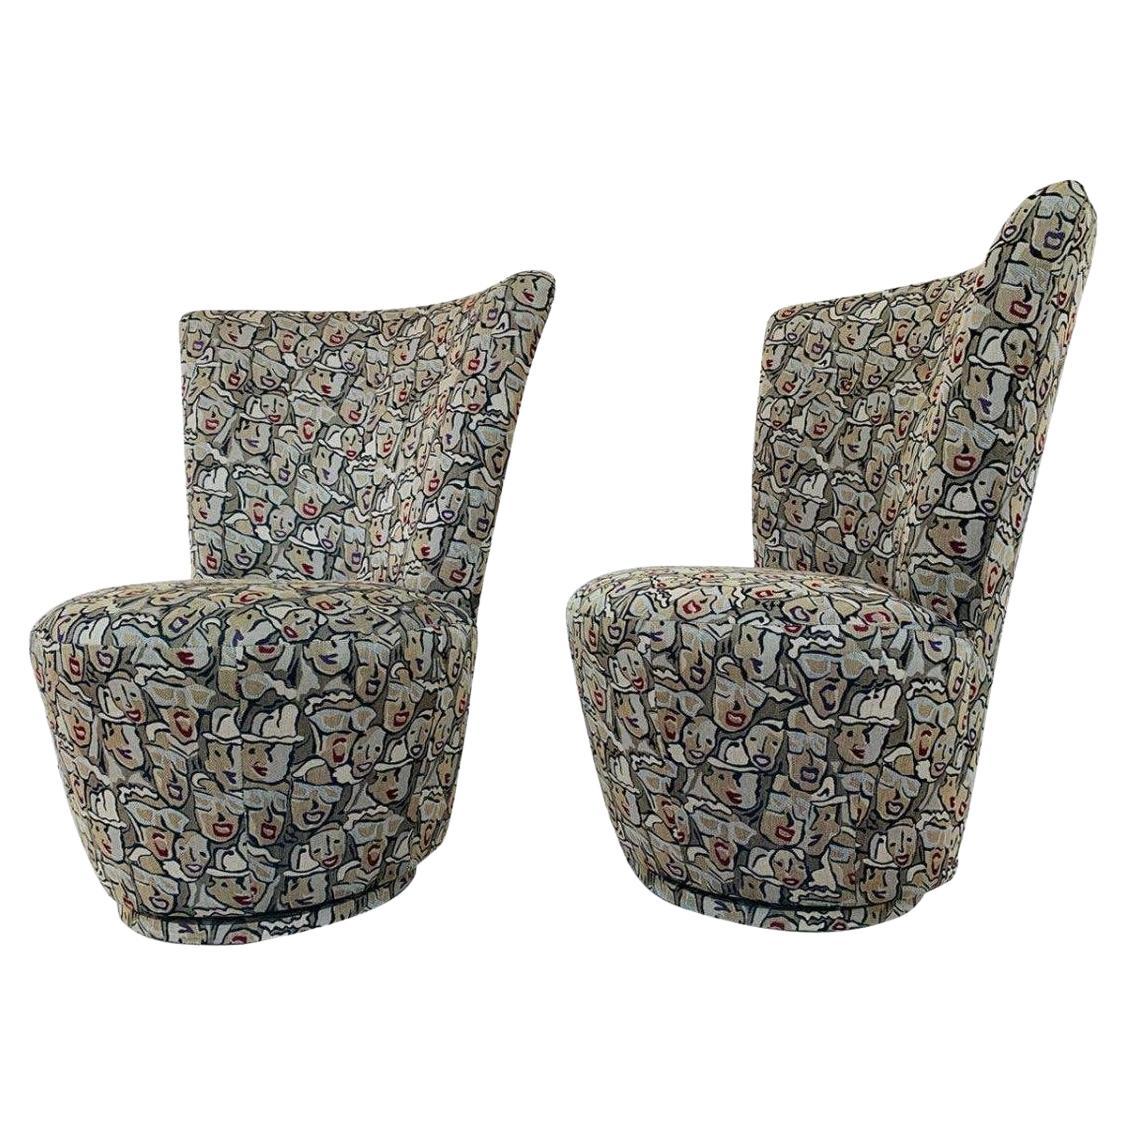 Pair of Highback Swivel Chairs by Carter Furniture